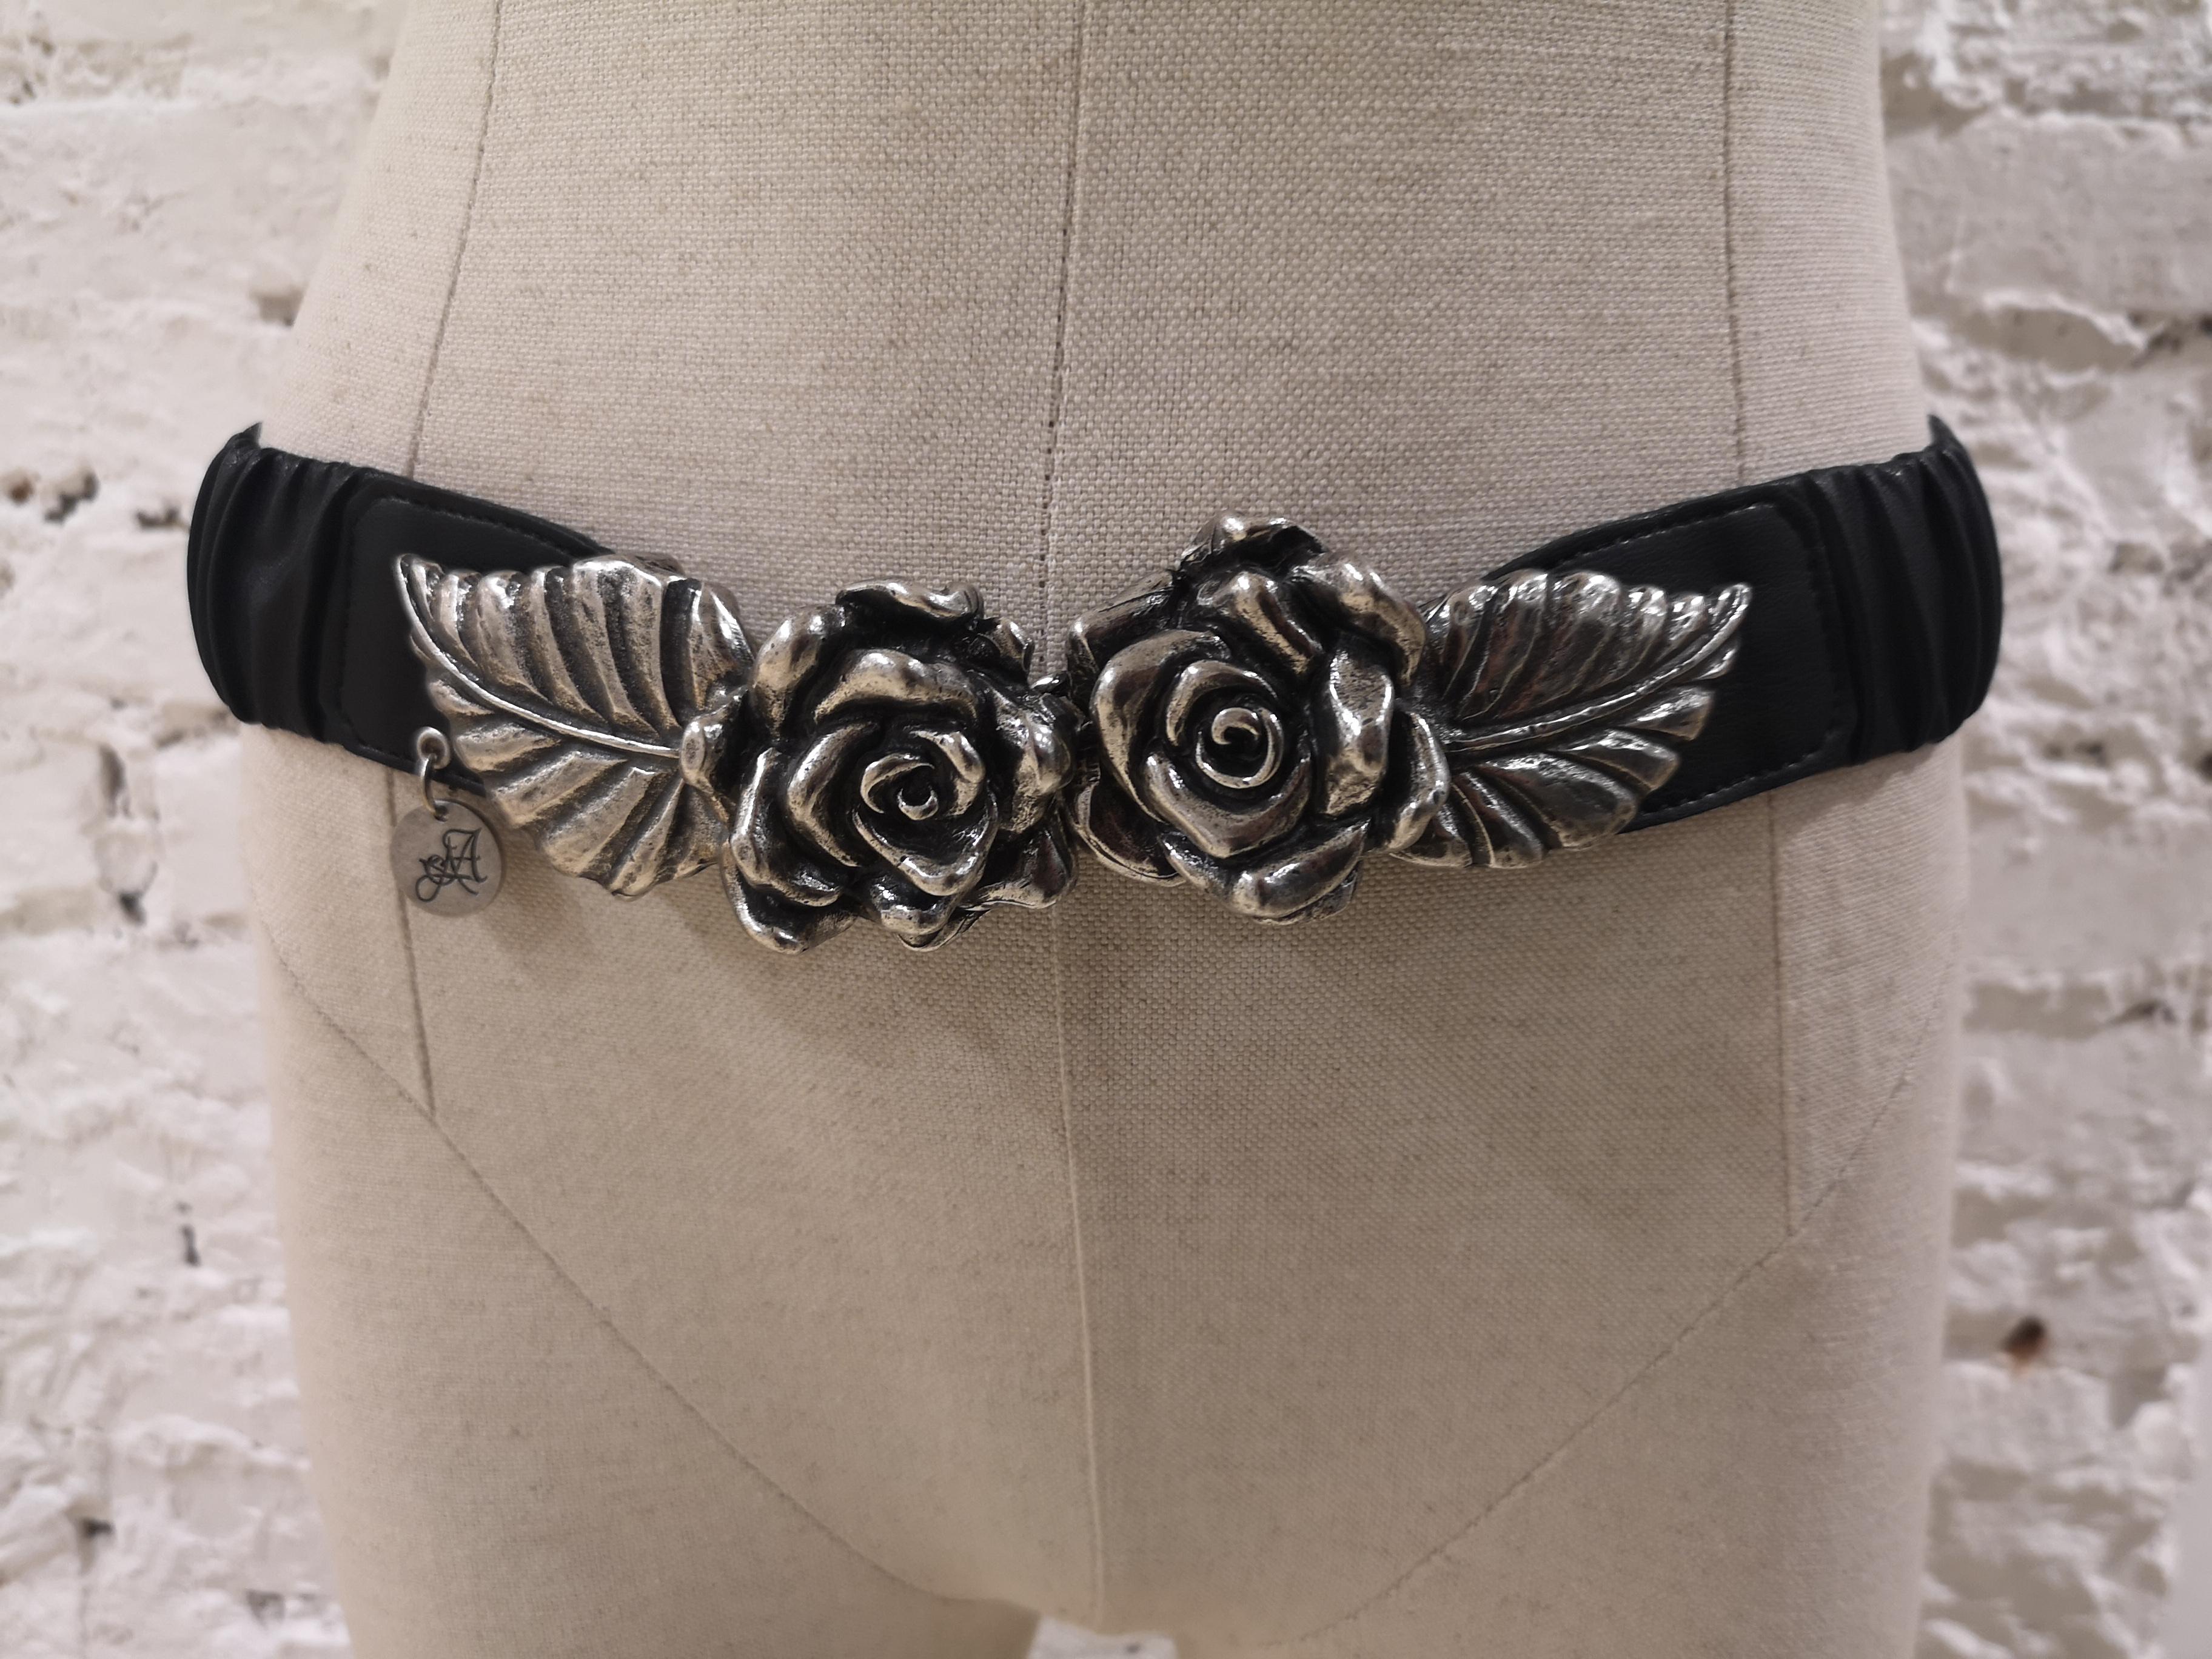 Black leather silver roses elastic belt
totally handmade in italy
